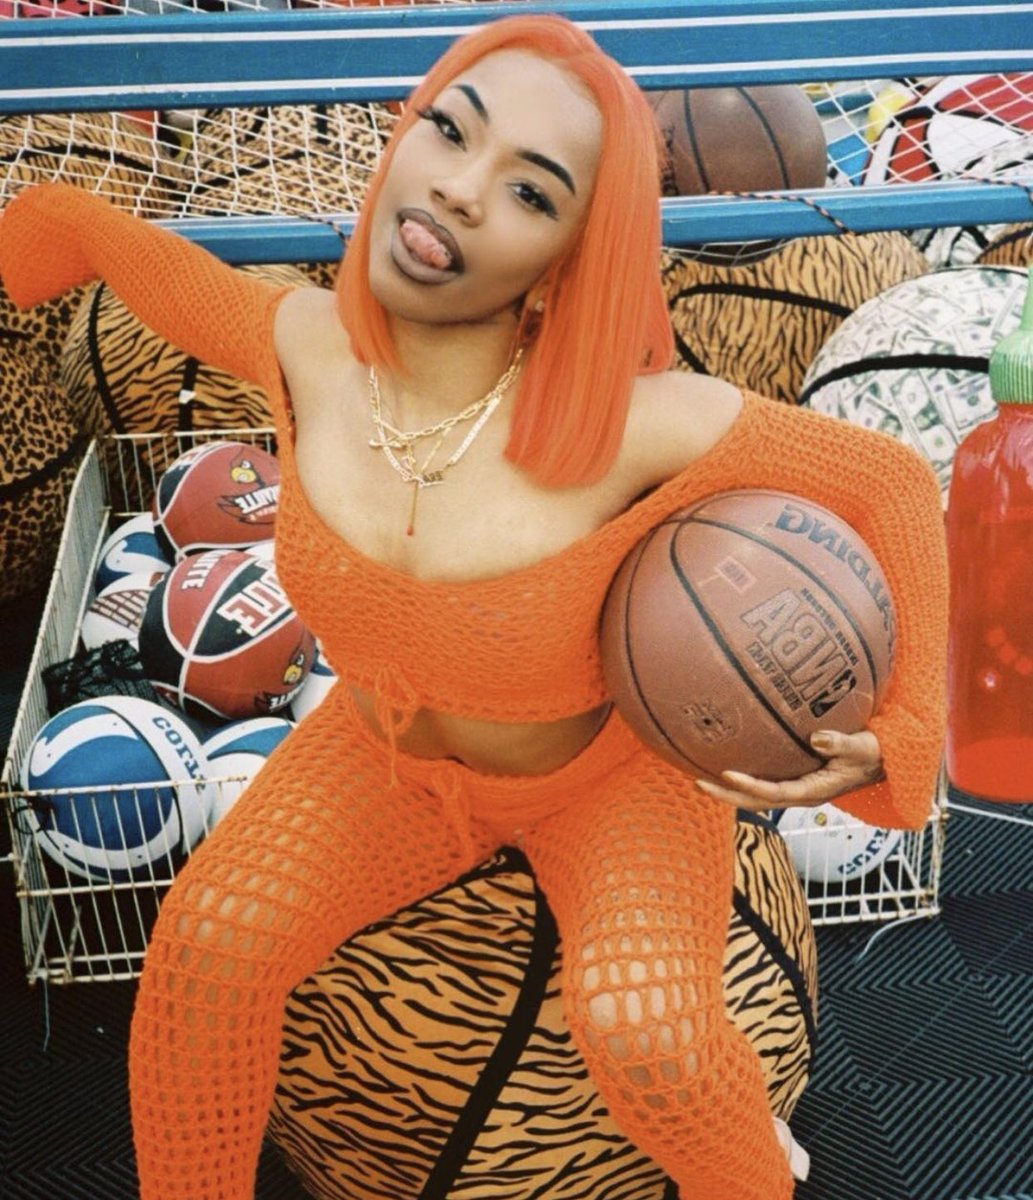 2 years ago today the beautiful and talented Rapper Brax passed away. We remember her for her music, her sense of style, and her beautiful soul 🧡